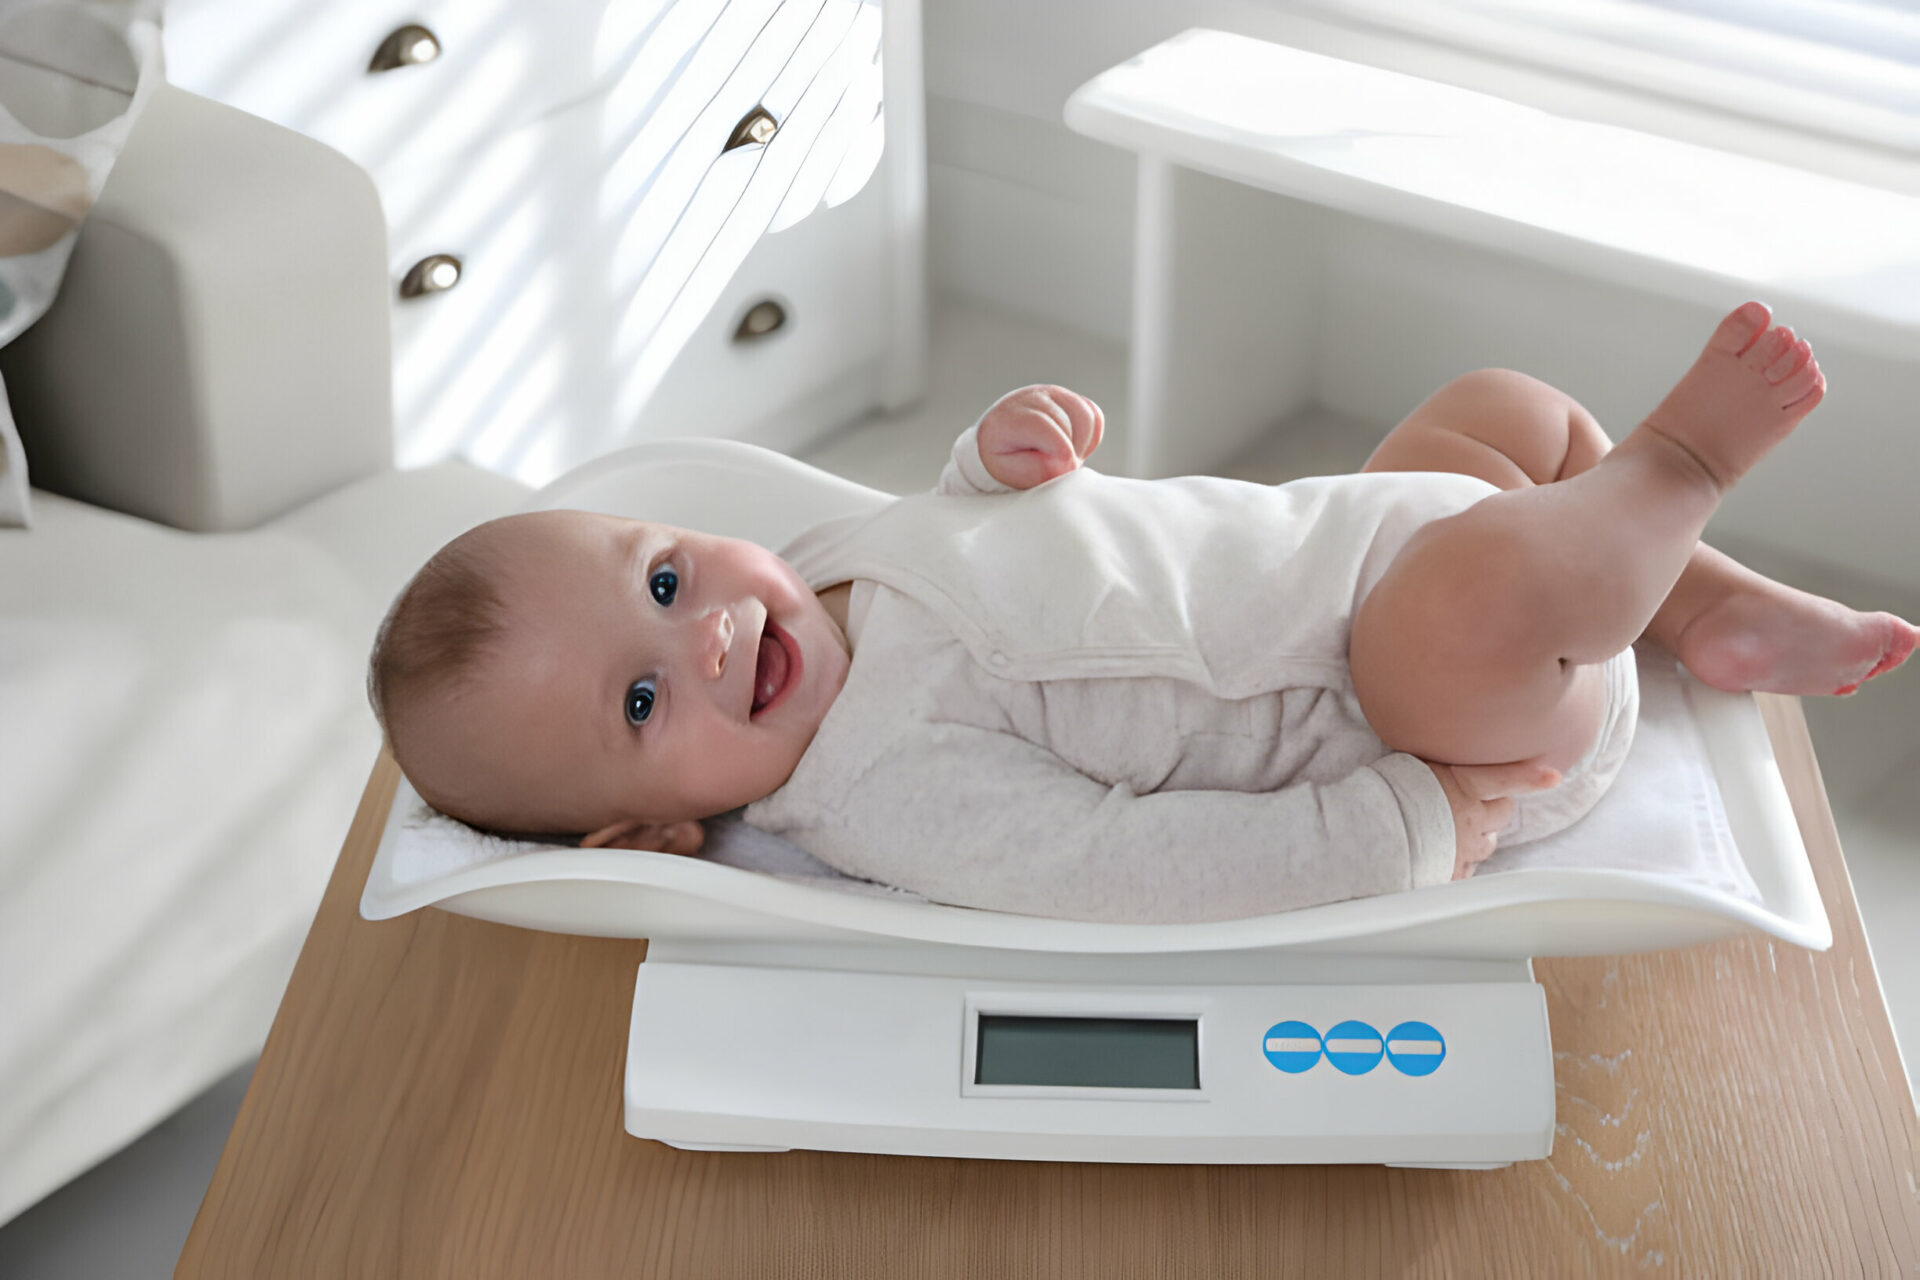 How To Weigh Baby At Home